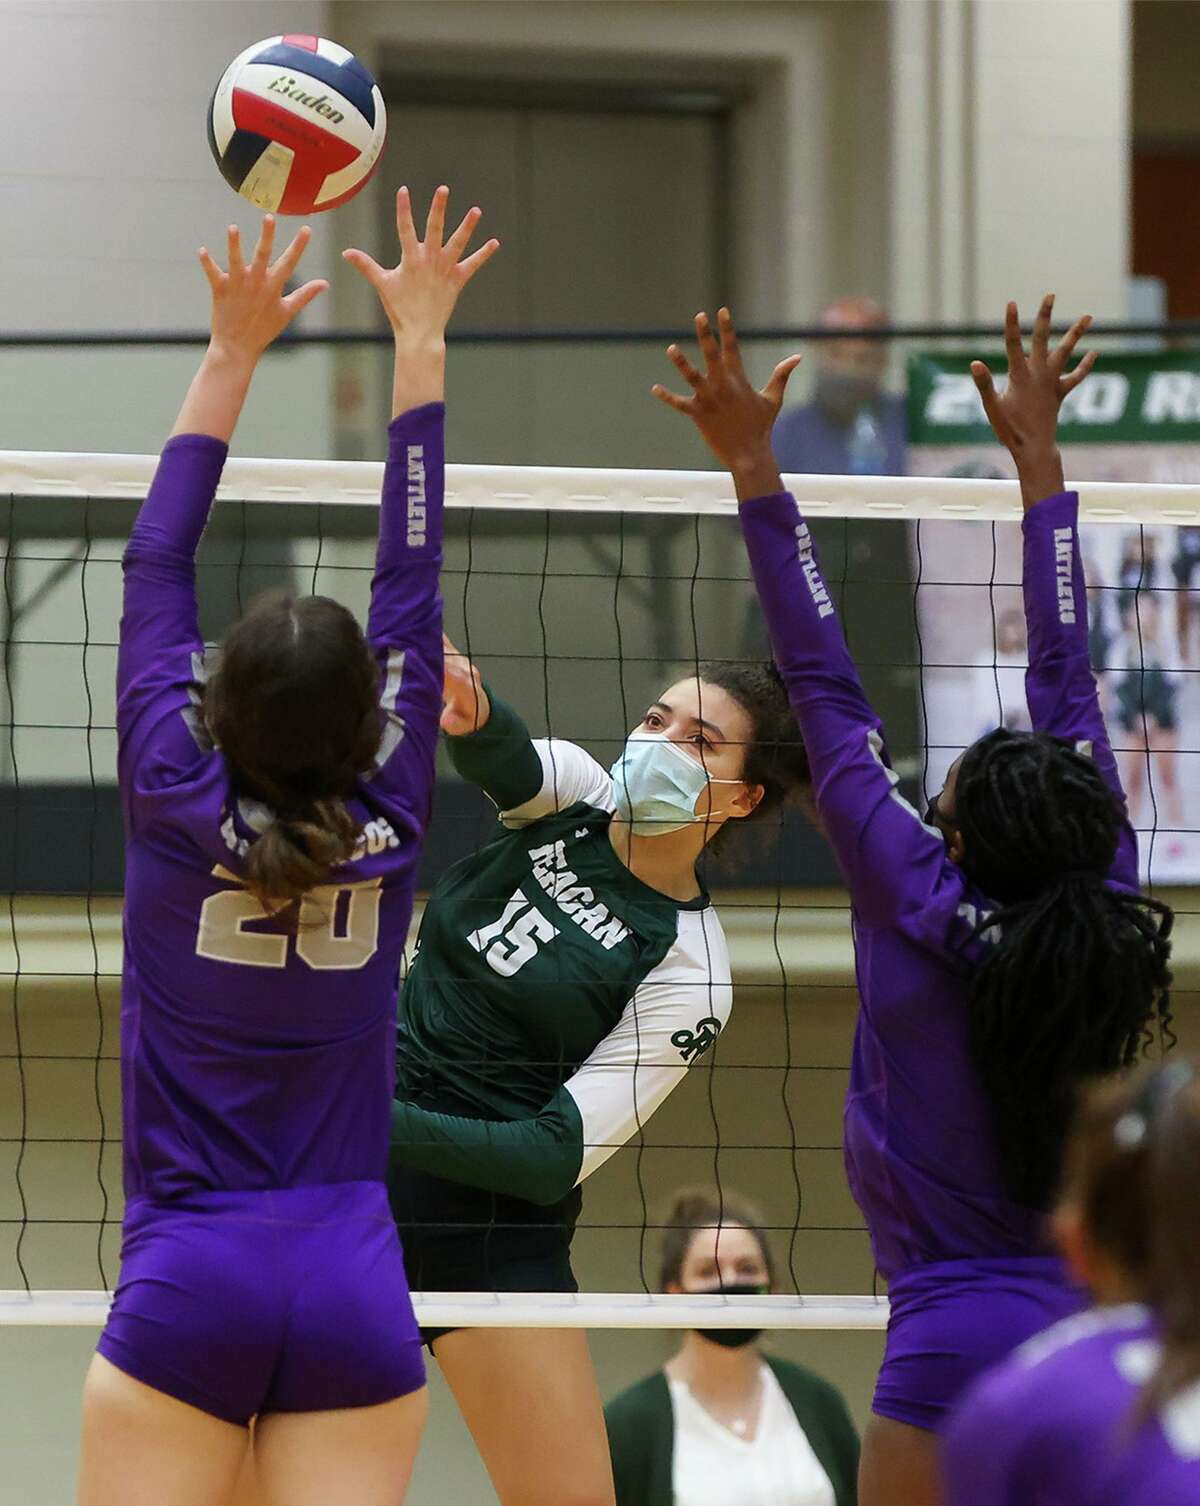 Reagan's Nyah Anderson, center, goes for a kill shot past San Marcos' Samantha Booth, left, and Qiera Green during their Class 6A volleyball second-round playoff match with San Marcos at Littleton Gym on Tuesday, Nov. 23, 2020. Reagan won the match in three sets: 25-20, 25-13, 25-12.